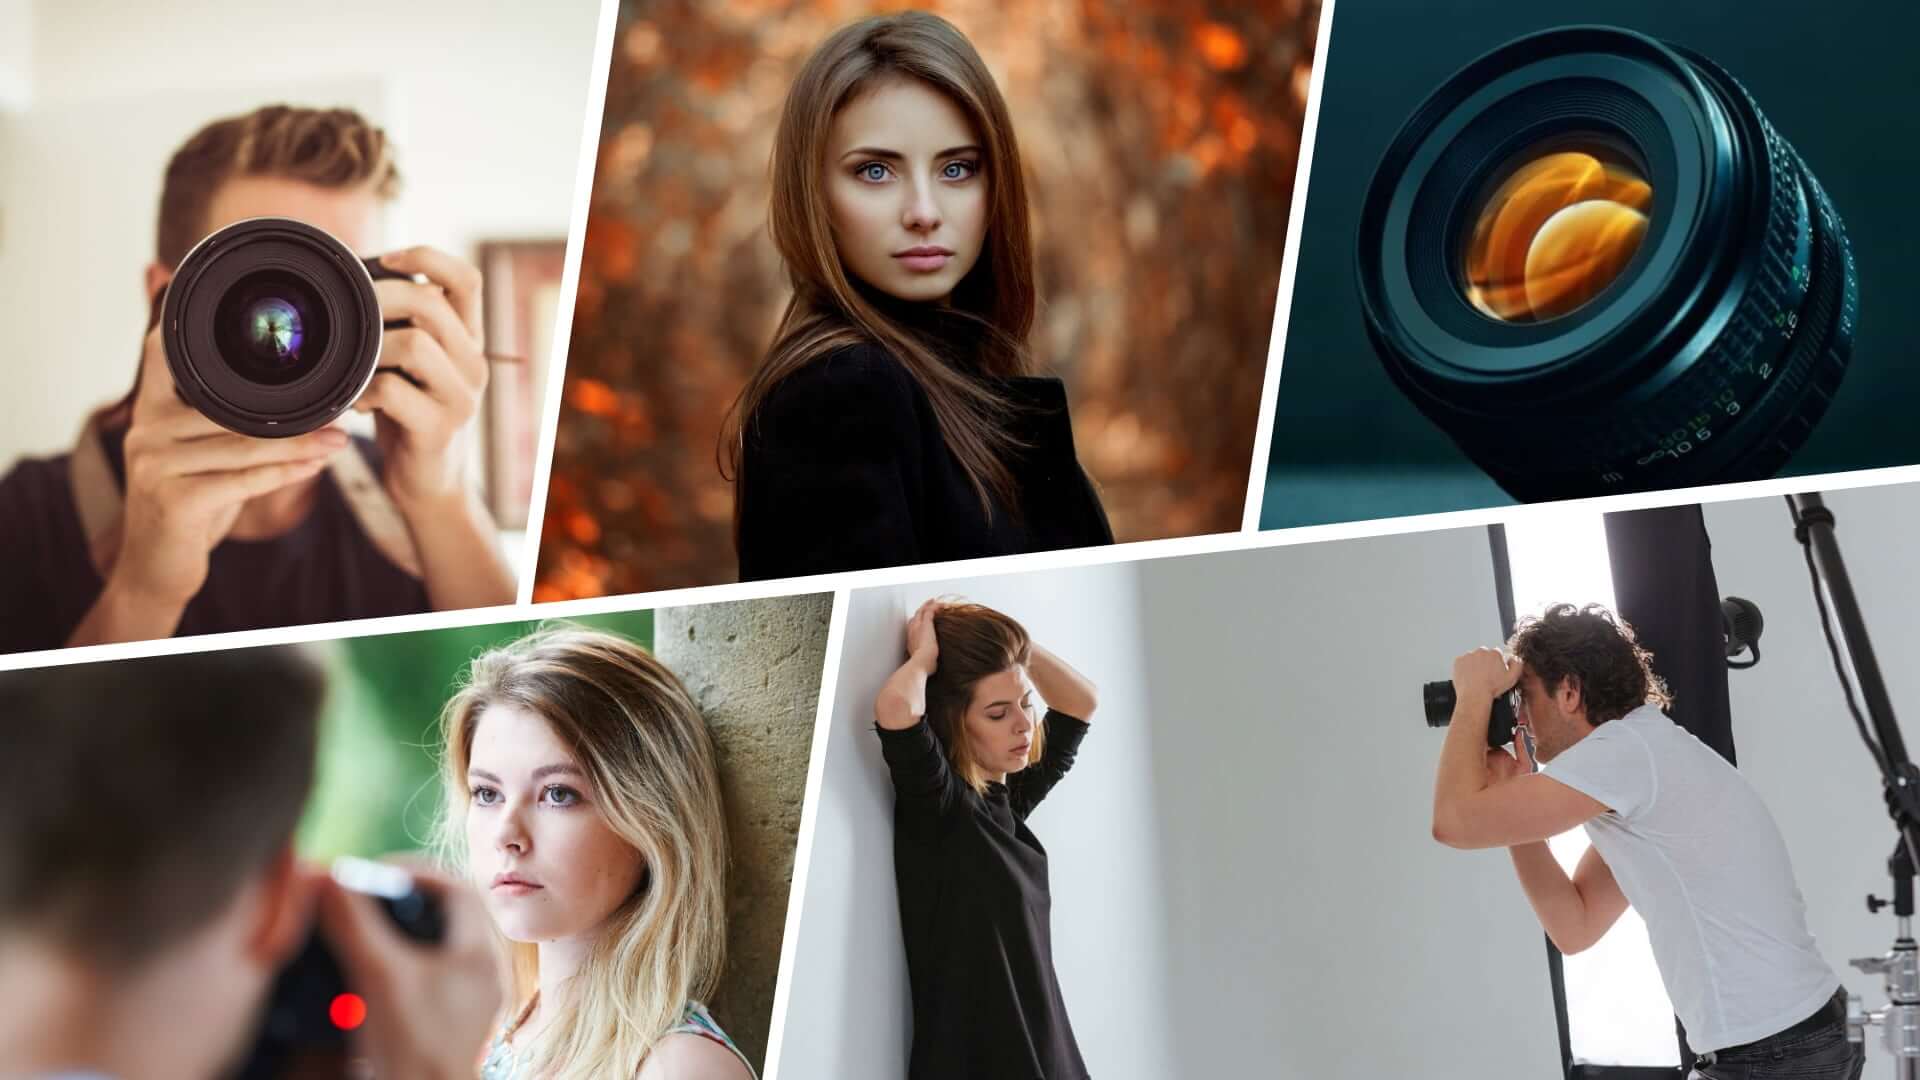 koken Bedreven Waterig What is the Best Lens for Portraits? — A Photographer's Guide